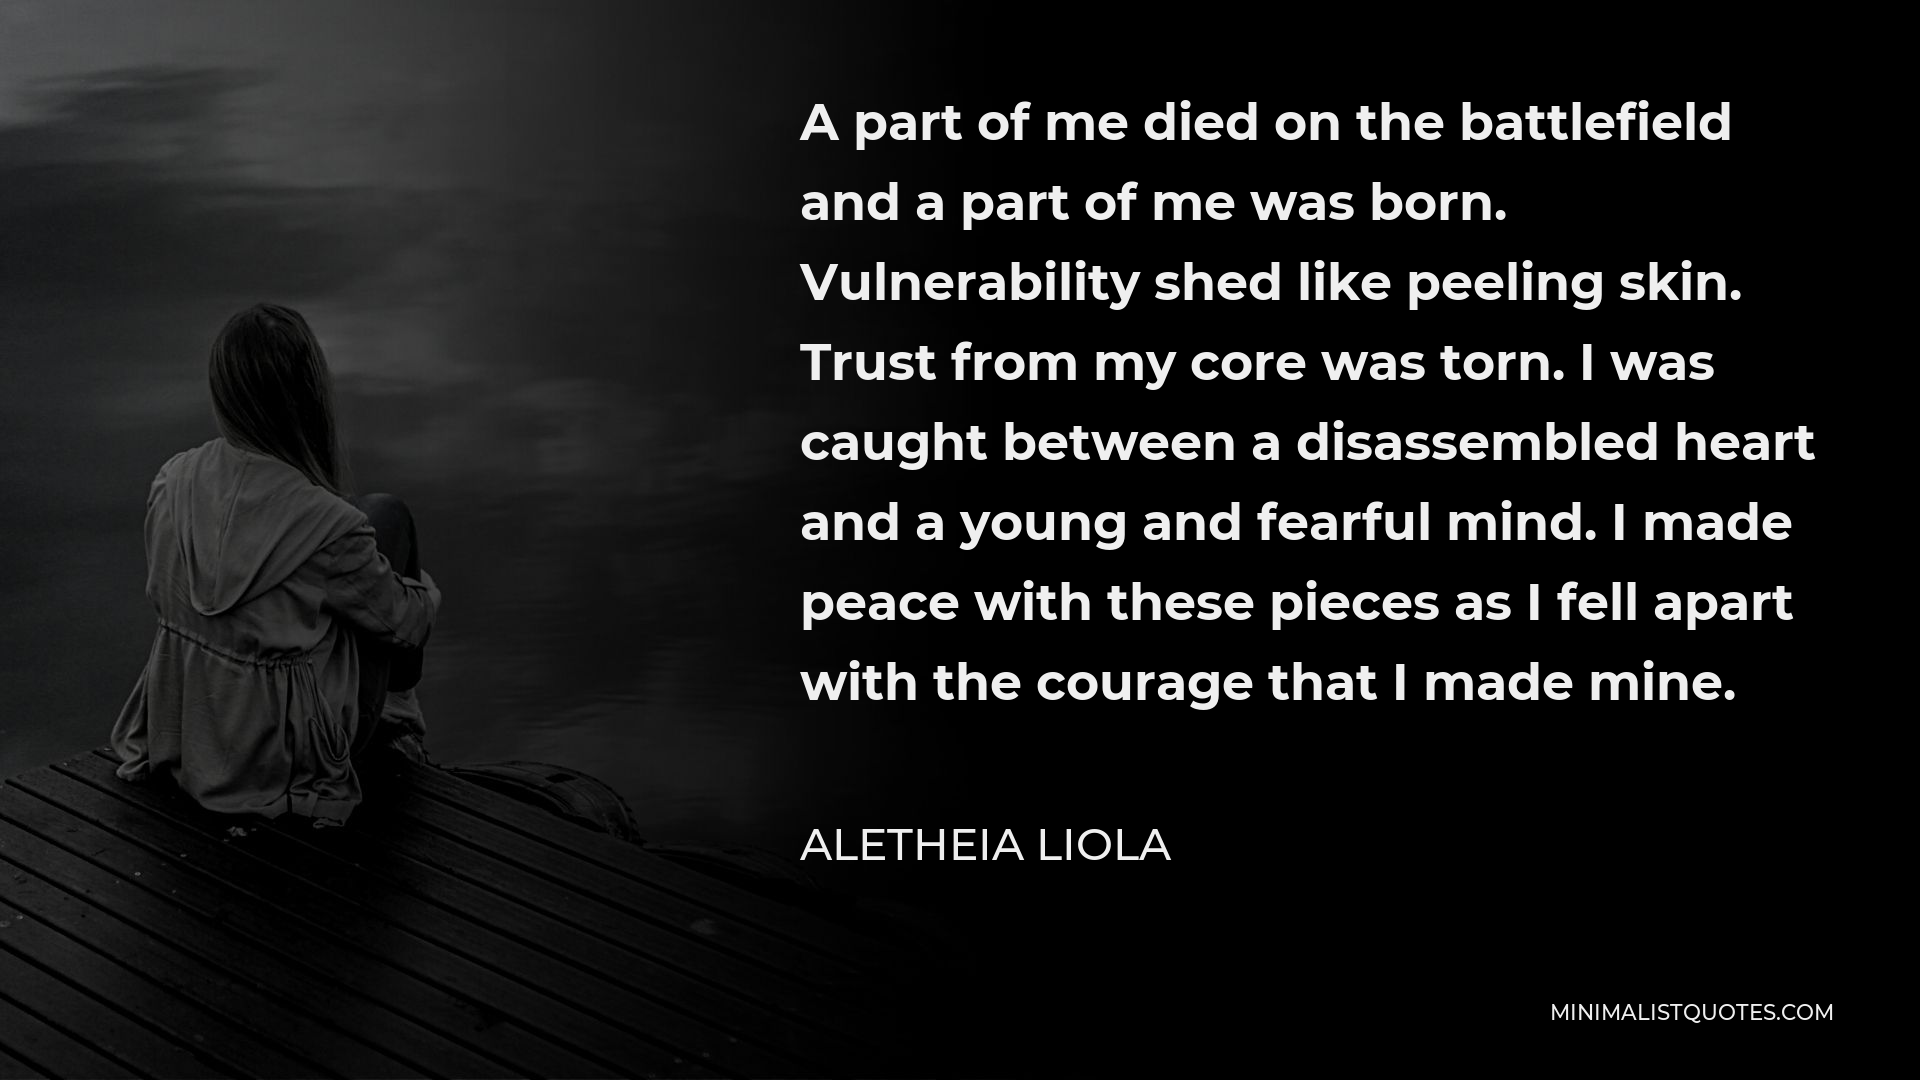 Aletheia Liola Quote - A part of me died on the battlefield and a part of me was born. Vulnerability shed like peeling skin. Trust from my core was torn. I was caught between a disassembled heart and a young and fearful mind. I made peace with these pieces as I fell apart with the courage that I made mine.